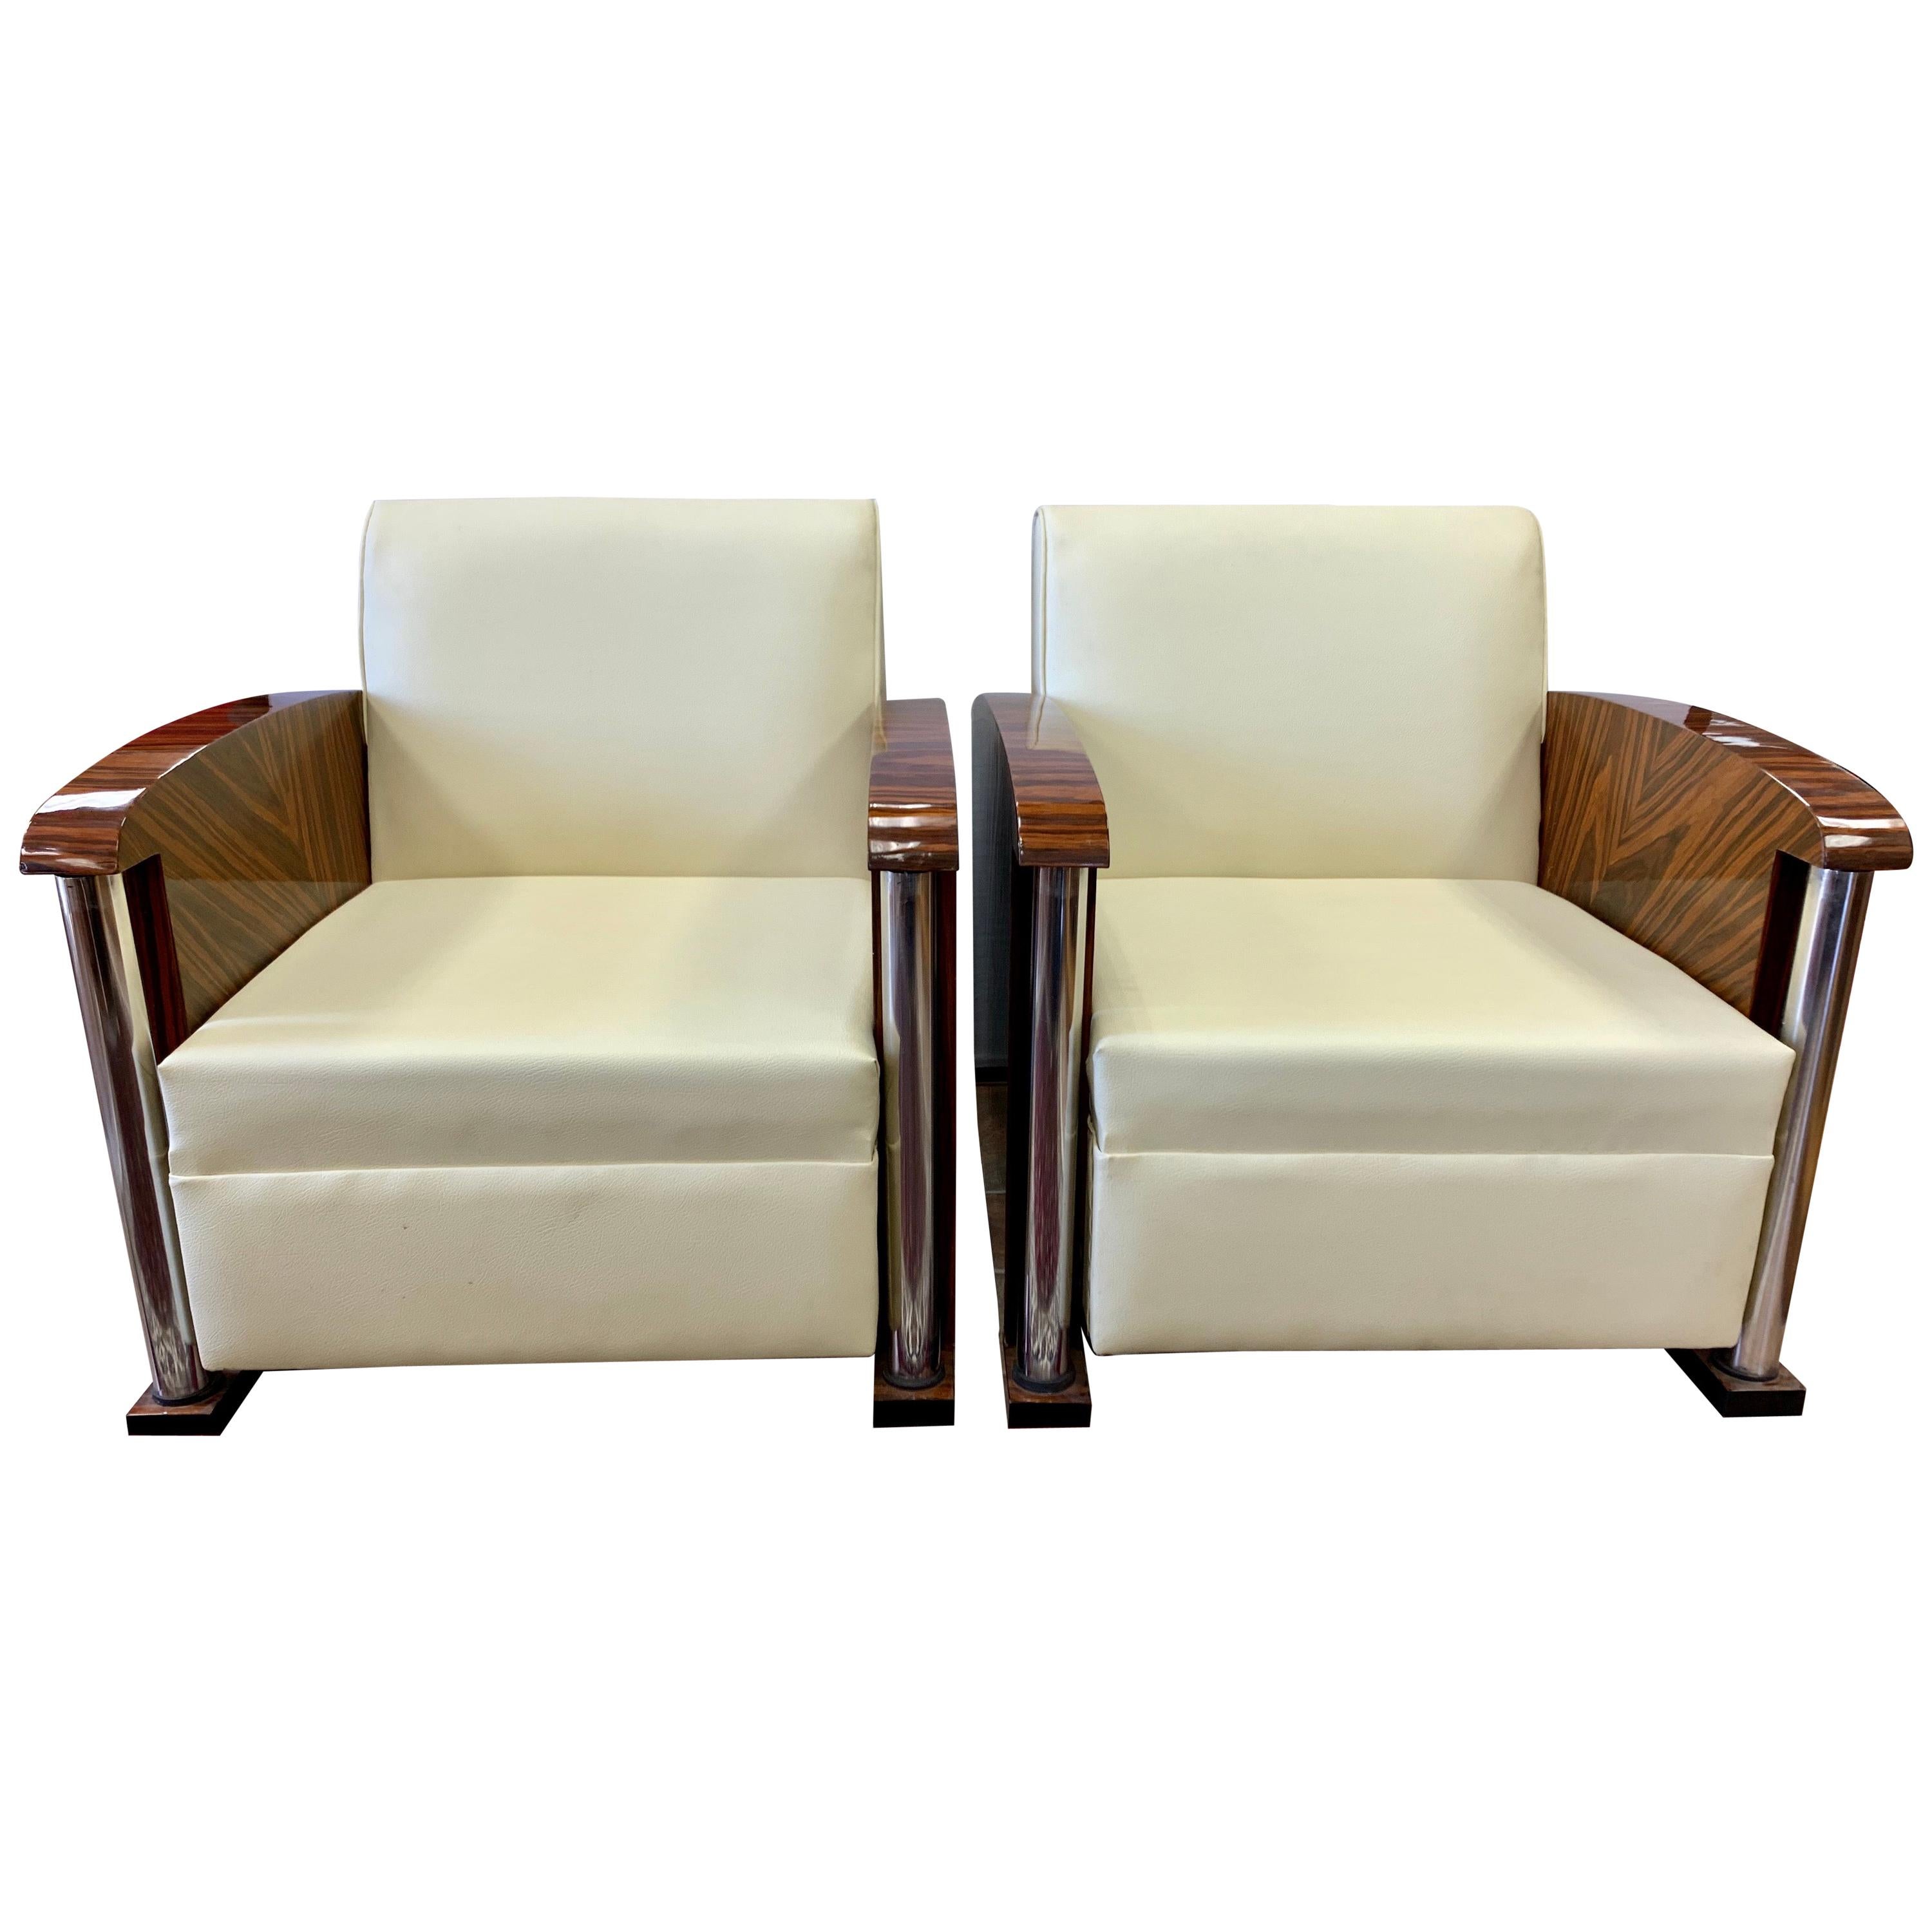 Art Deco South African Macassar Wood, Chrome and Leather Club Chairs, Pair